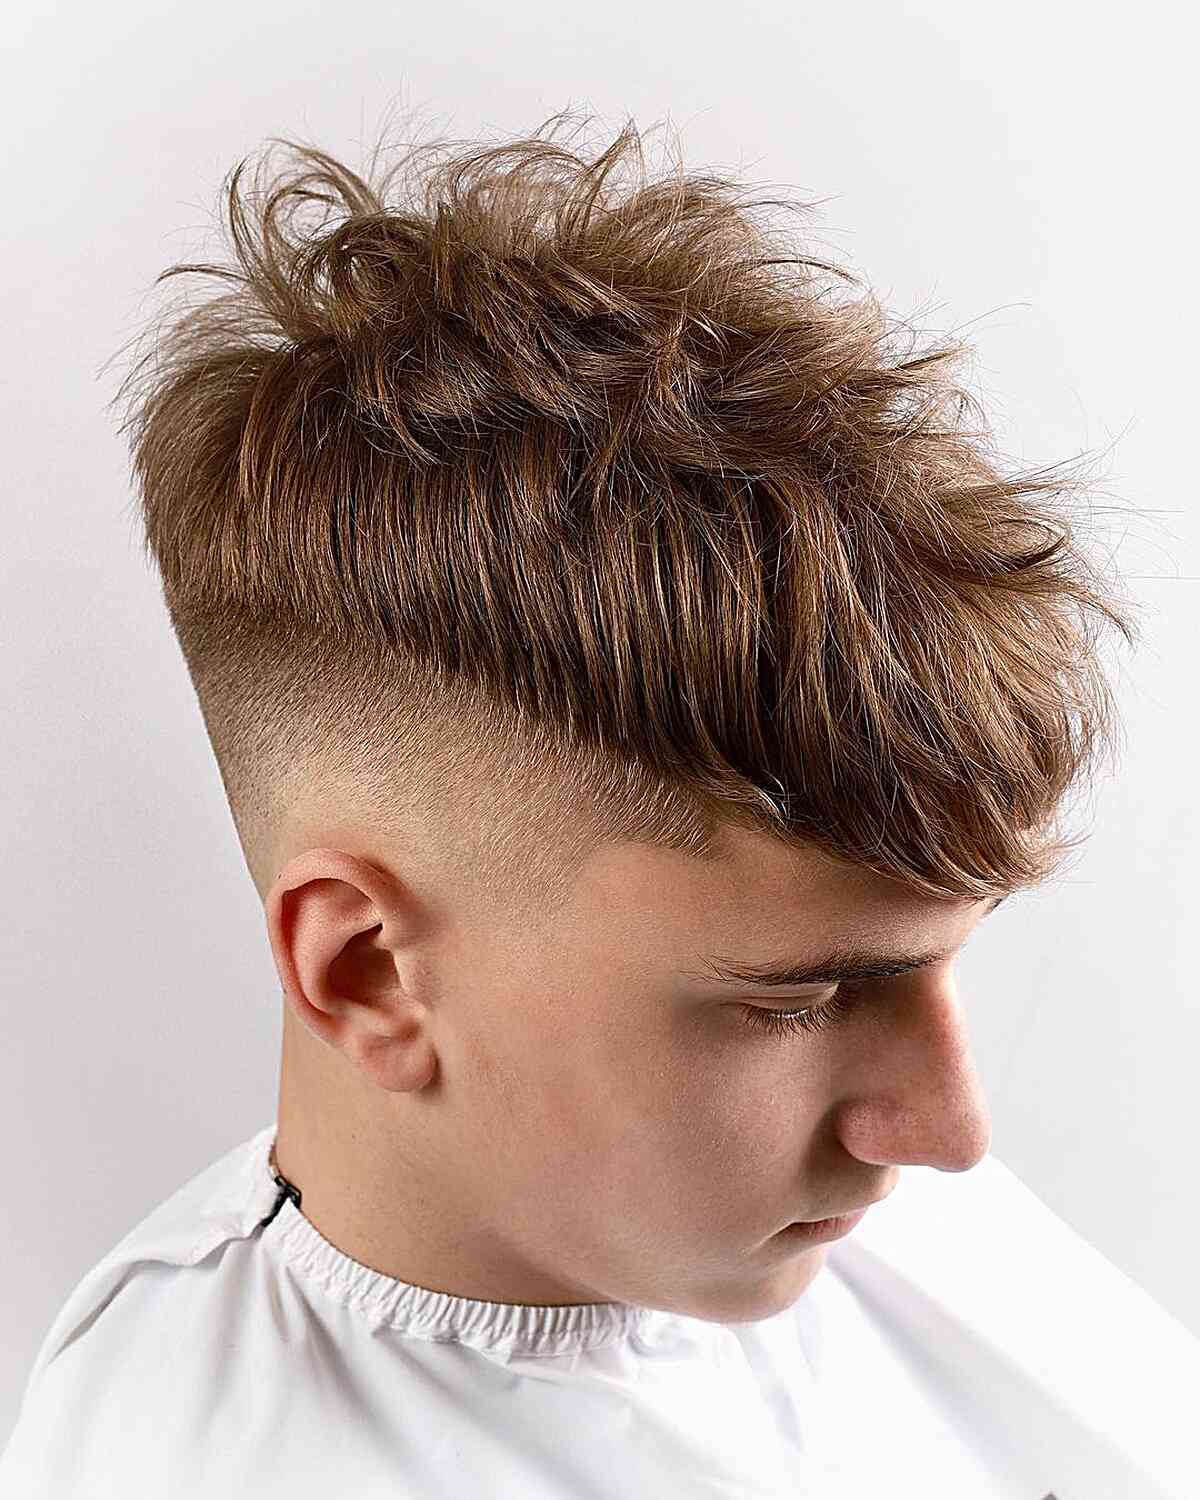 High Fade with a Messy Long Top for Teen Boys with Low Bald Fade